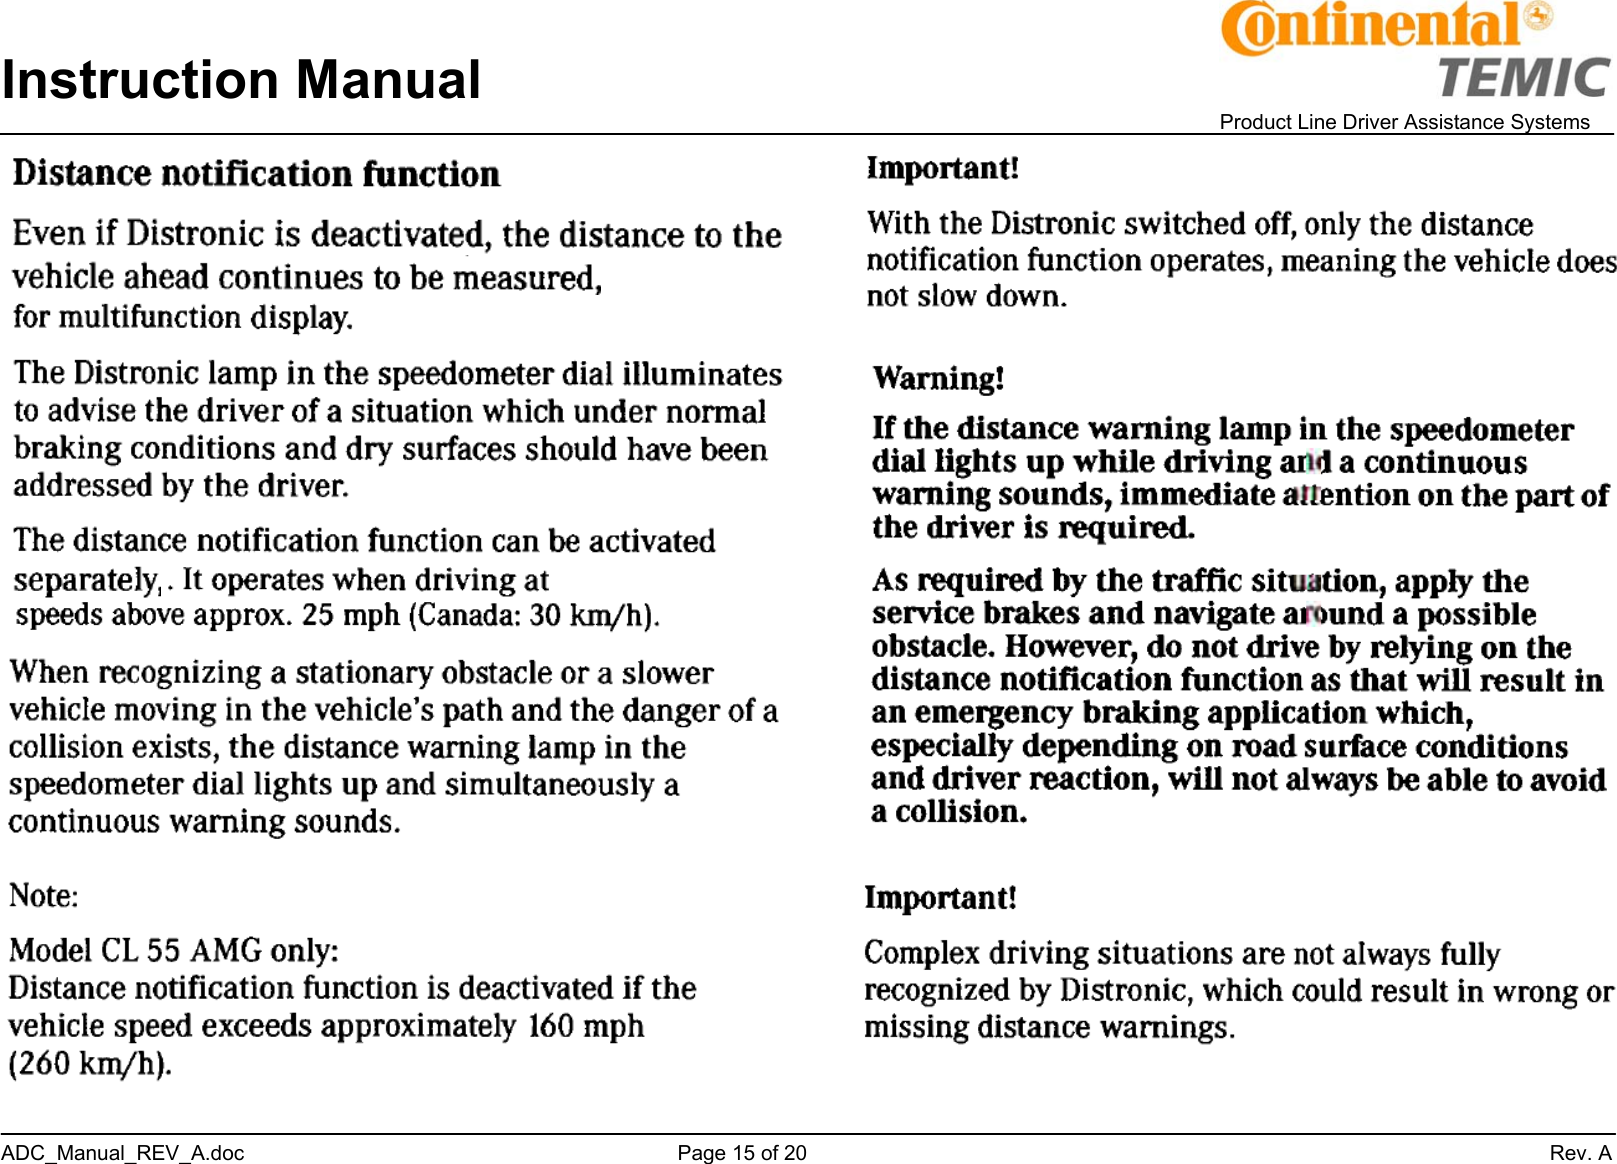 Instruction Manual    Product Line Driver Assistance Systems ADC_Manual_REV_A.doc     Page 15 of 20                 Rev. A            